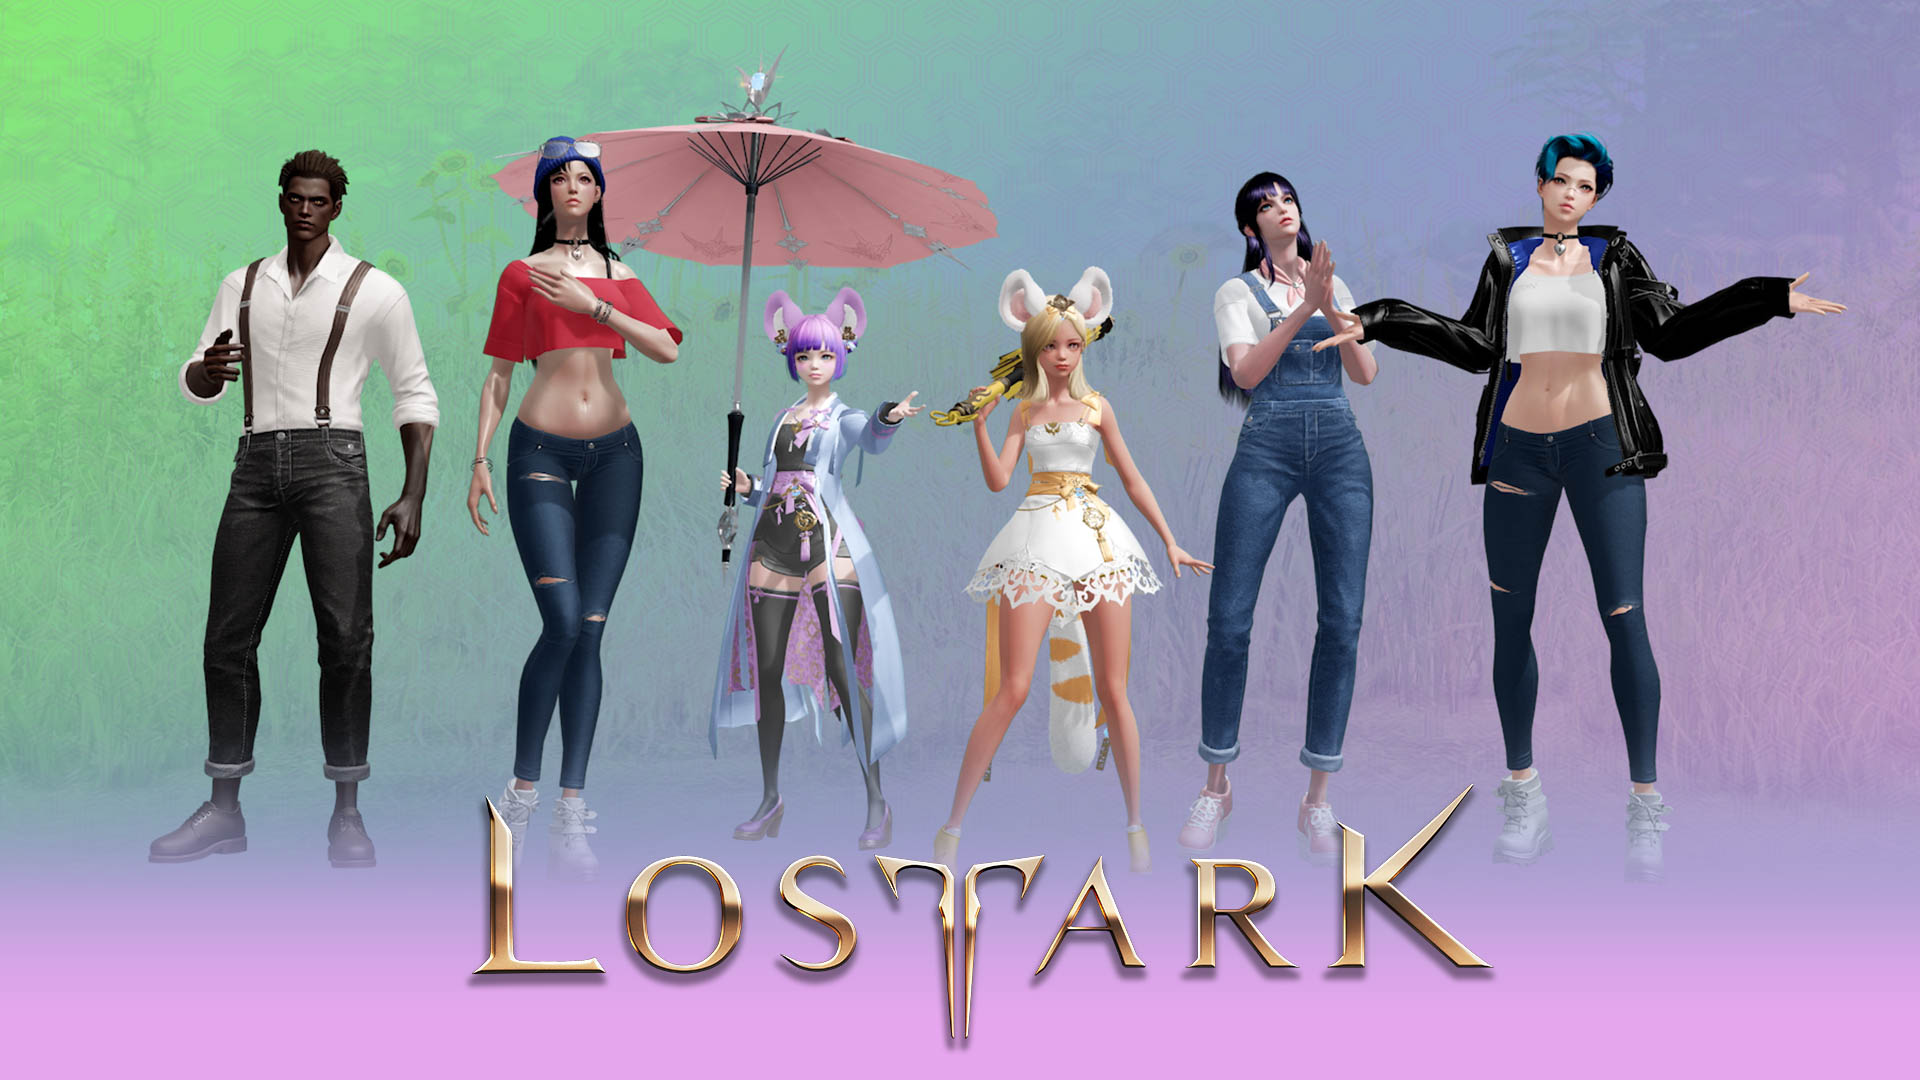 Major Lost Ark Update to Introduce Changes in Earning Gold - Siliconera